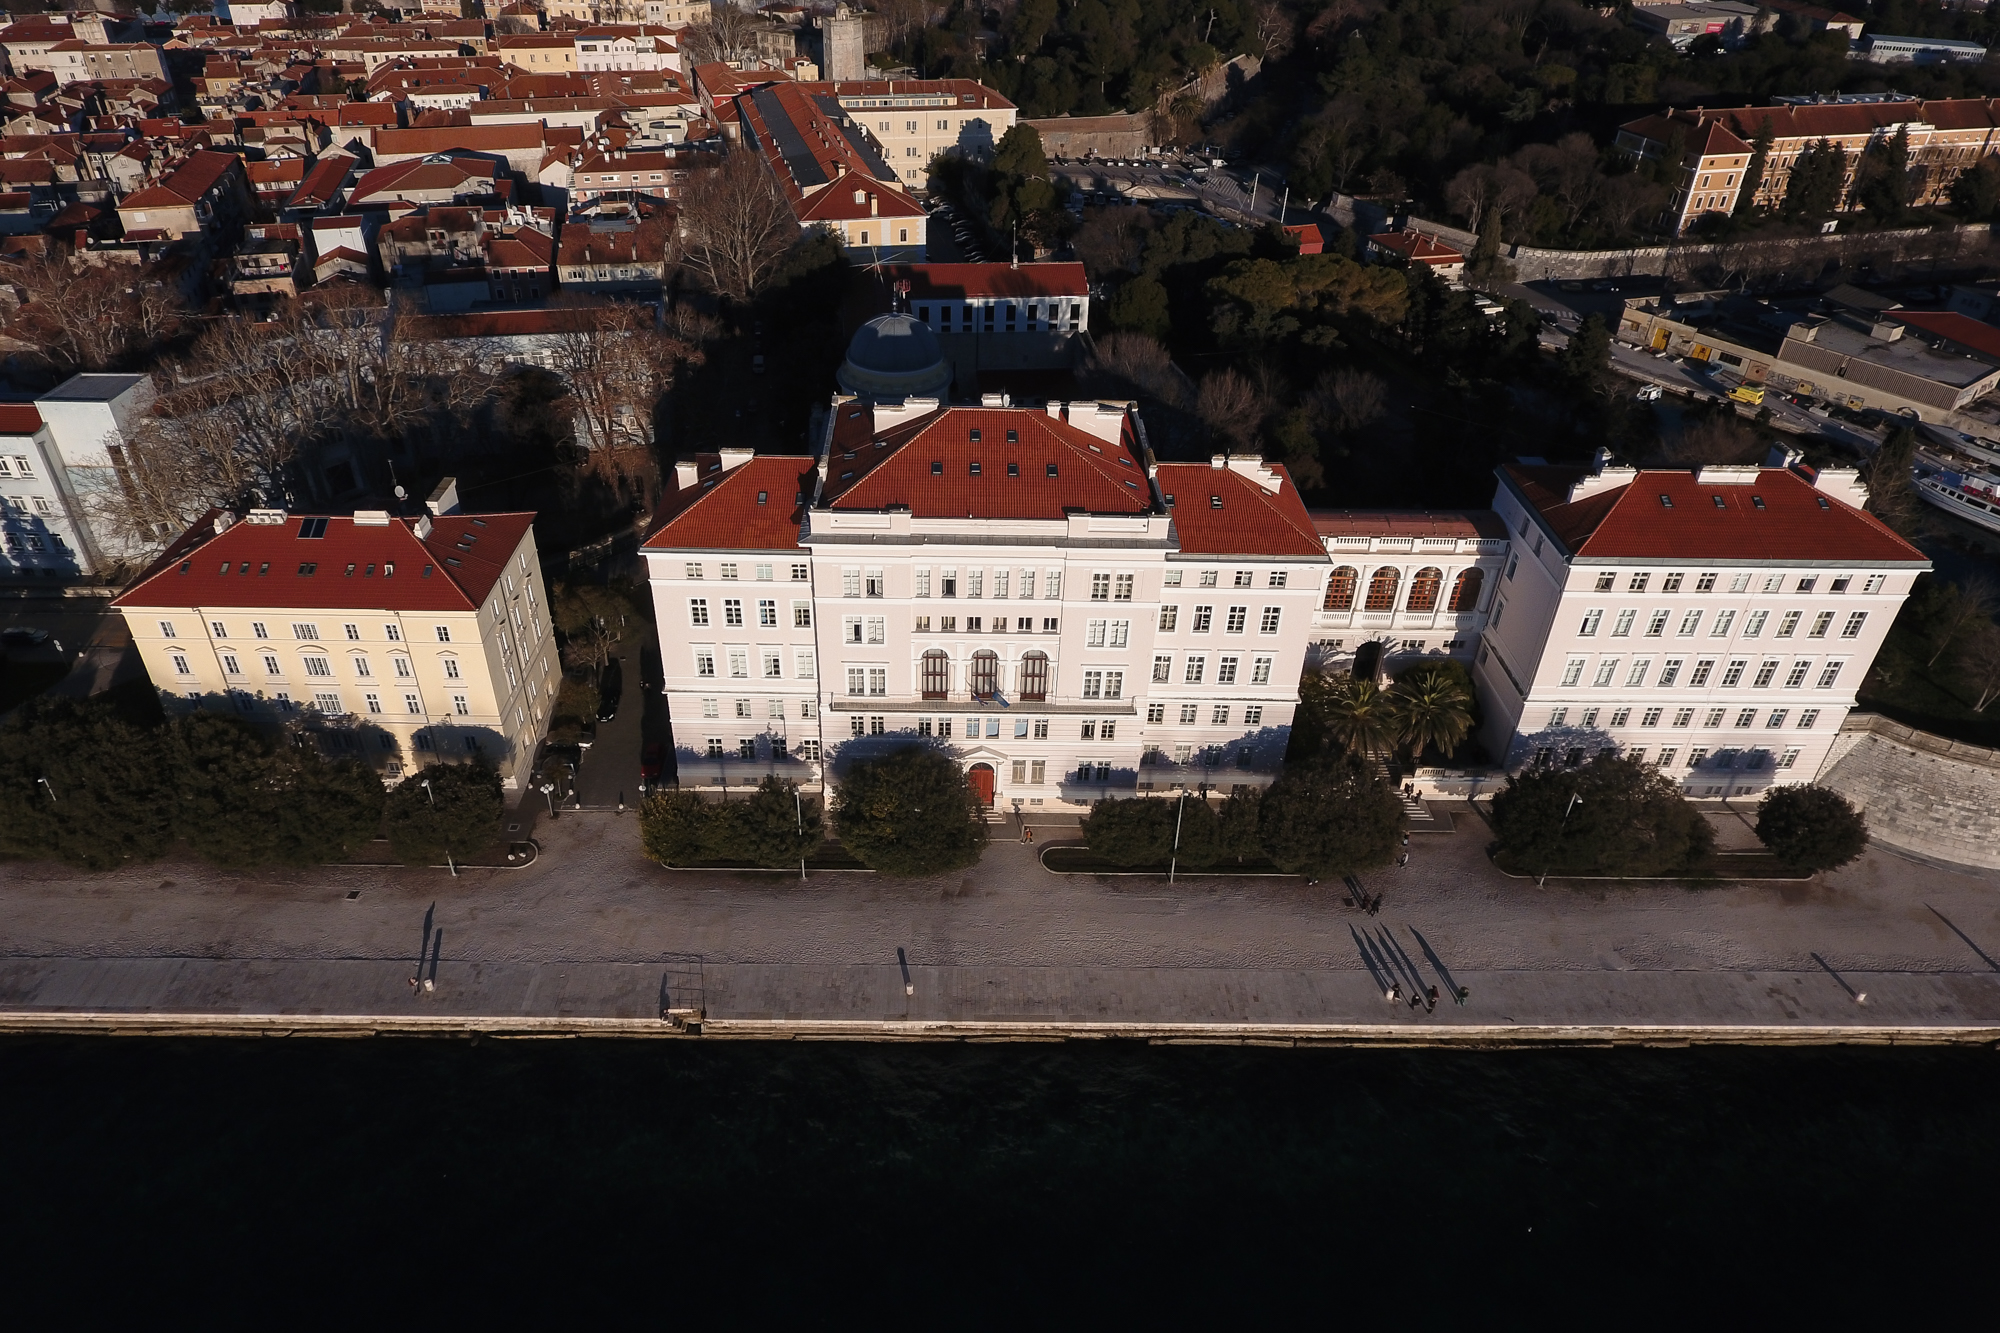 An aerial view of the University of Zadar